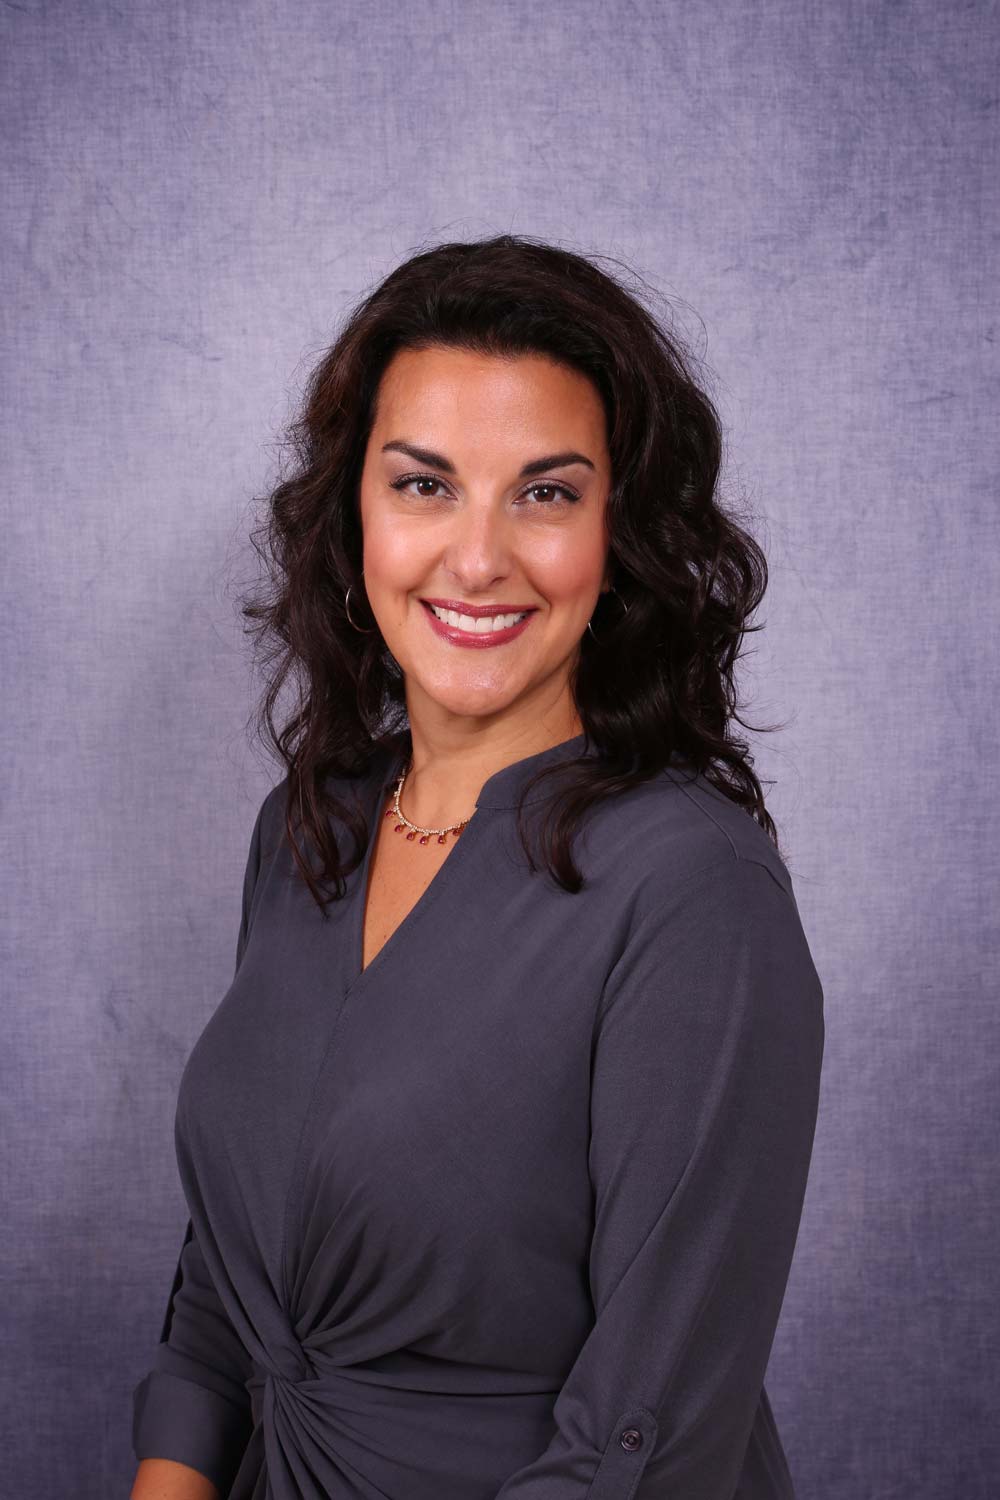 Rosa Cannata - Physician Assistants Certified of CNY Cosmetic & Reconstructive Surgery, LCC in Syracuse, New York